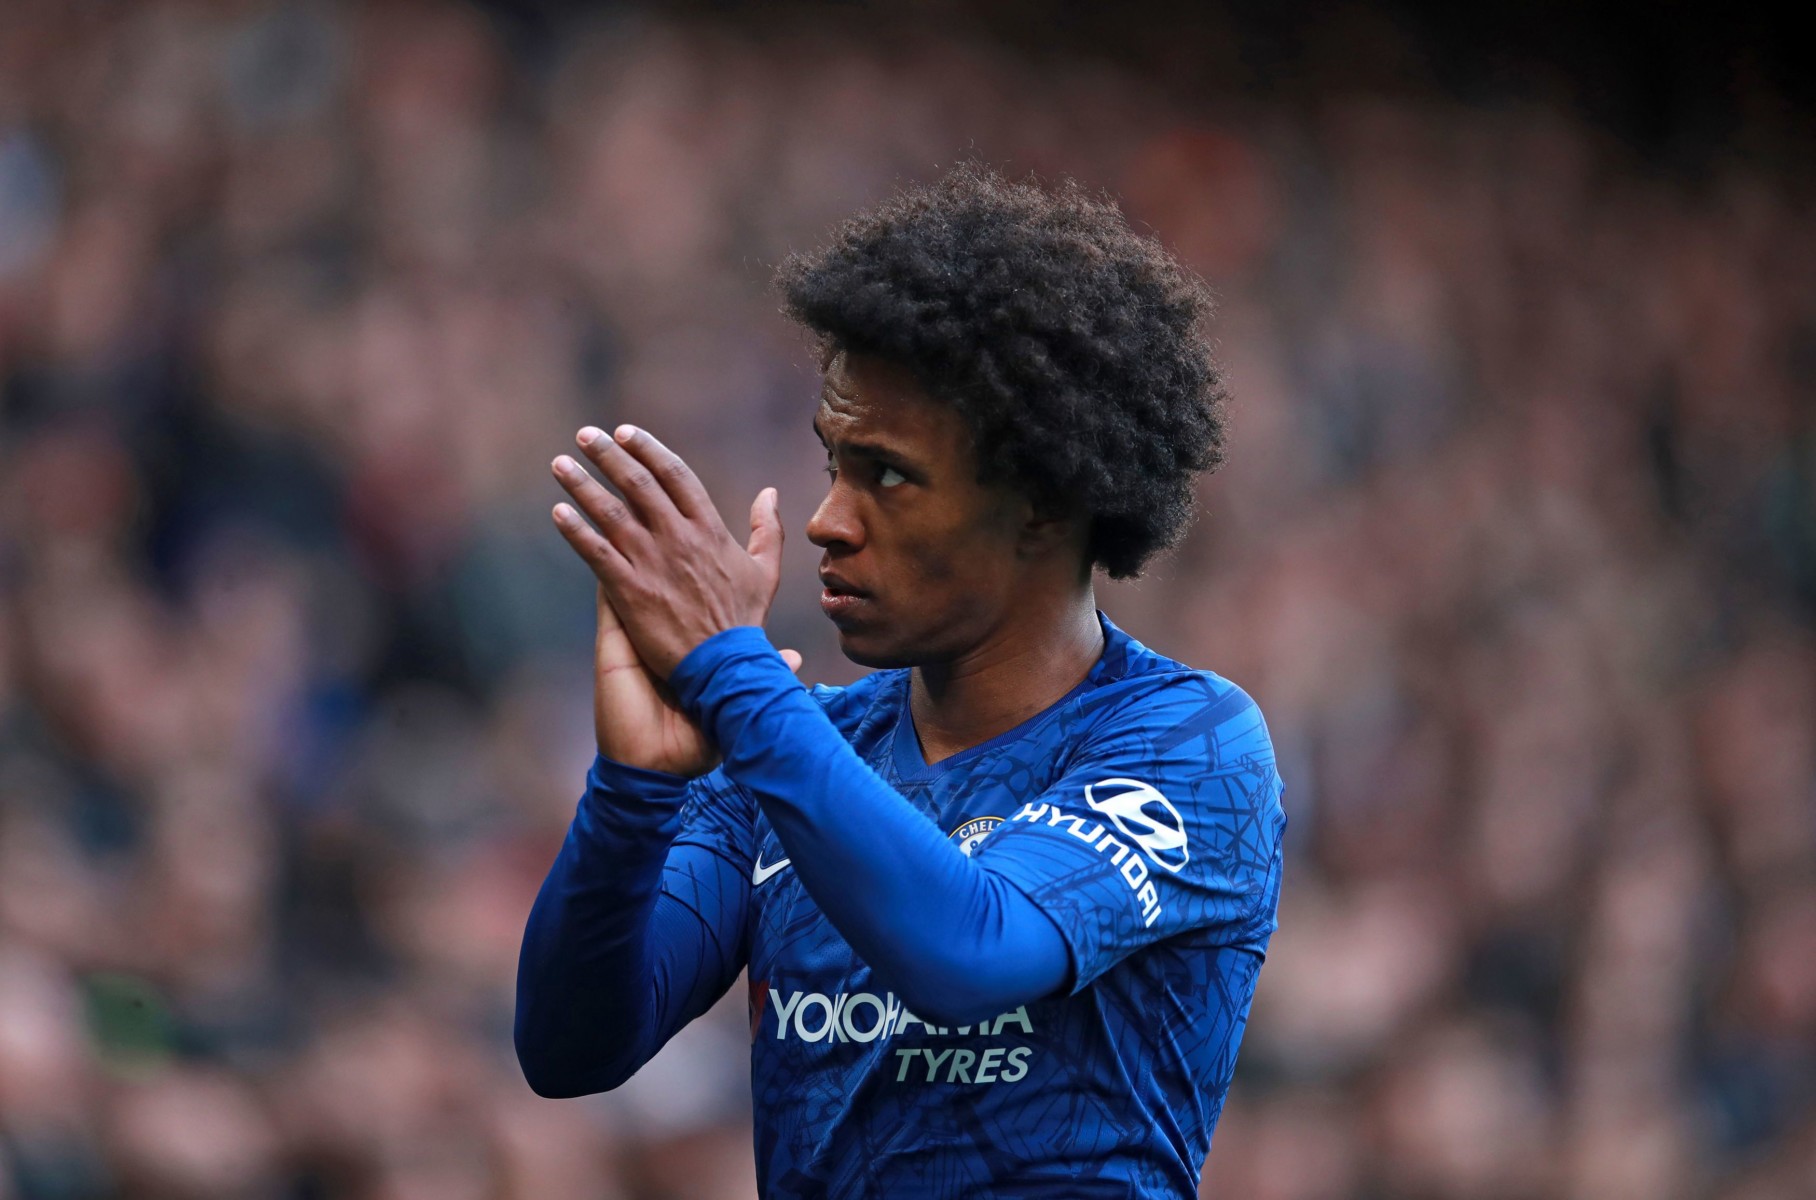 , Willian vows he’s ready to play for Chelsea AFTER contract runs out to stay ‘loyal’ during coronavirus crisis